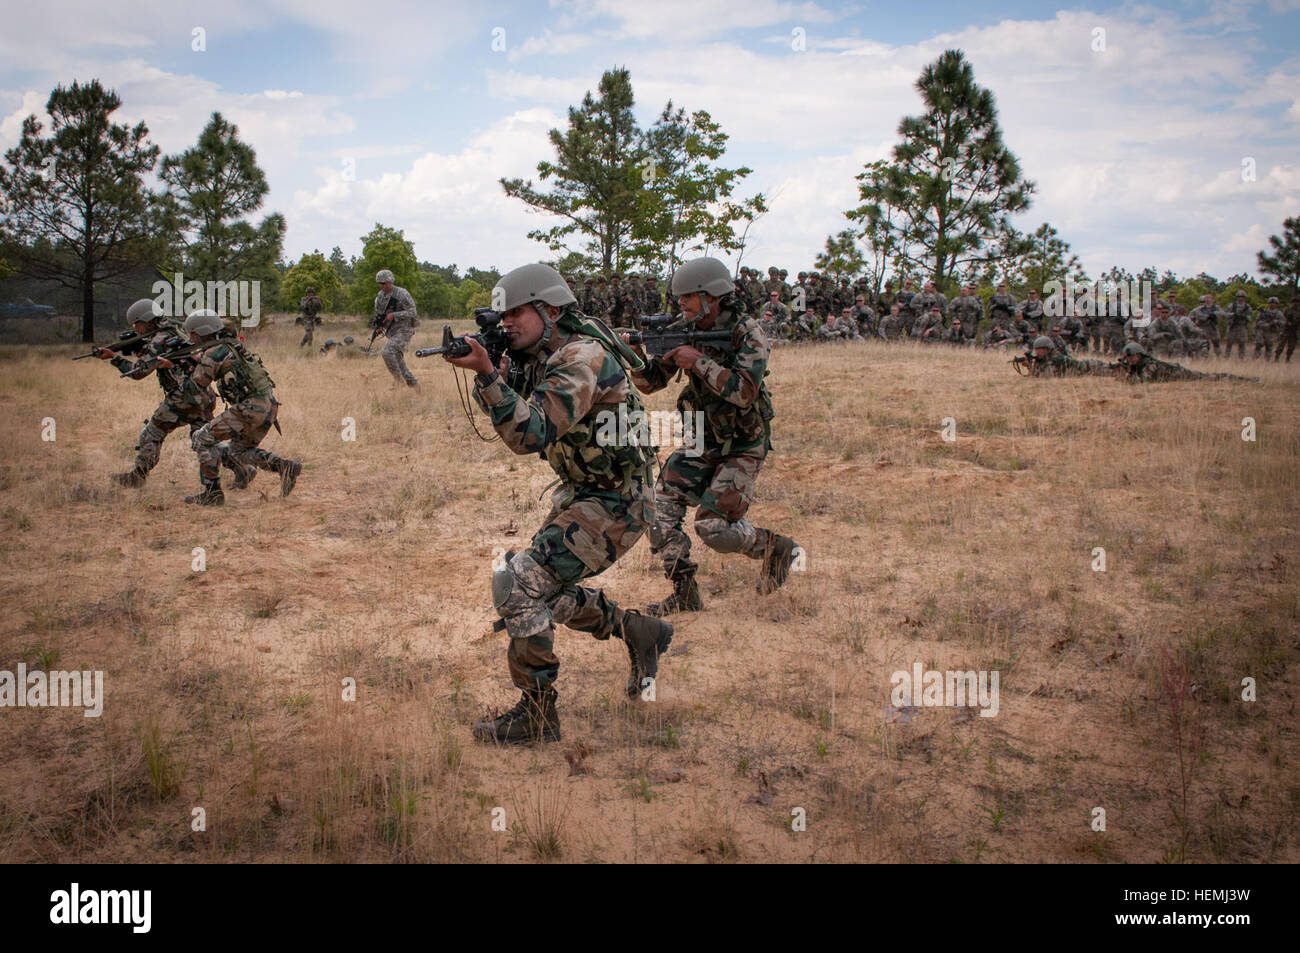 Indian Army soldiers with the 99th Mountain Brigade’s 2nd Battalion, 5th Gurkha Rifles, execute an ambush for paratroopers with the U.S. Army’s 1st Brigade Combat Team, 82nd Airborne Division, May 7, 2013, at Fort Bragg, N.C.  The soldiers are participating in Yudh Abhyas, an annual bilateral training event between the armies of the United States and India sponsored by U.S. Army Pacific.  (U.S. Army photo by Sgt. Michael J. MacLeod) Yudh Abhyas 2013, 2nd Batallion, 5th Gurkha Rifles Stock Photo